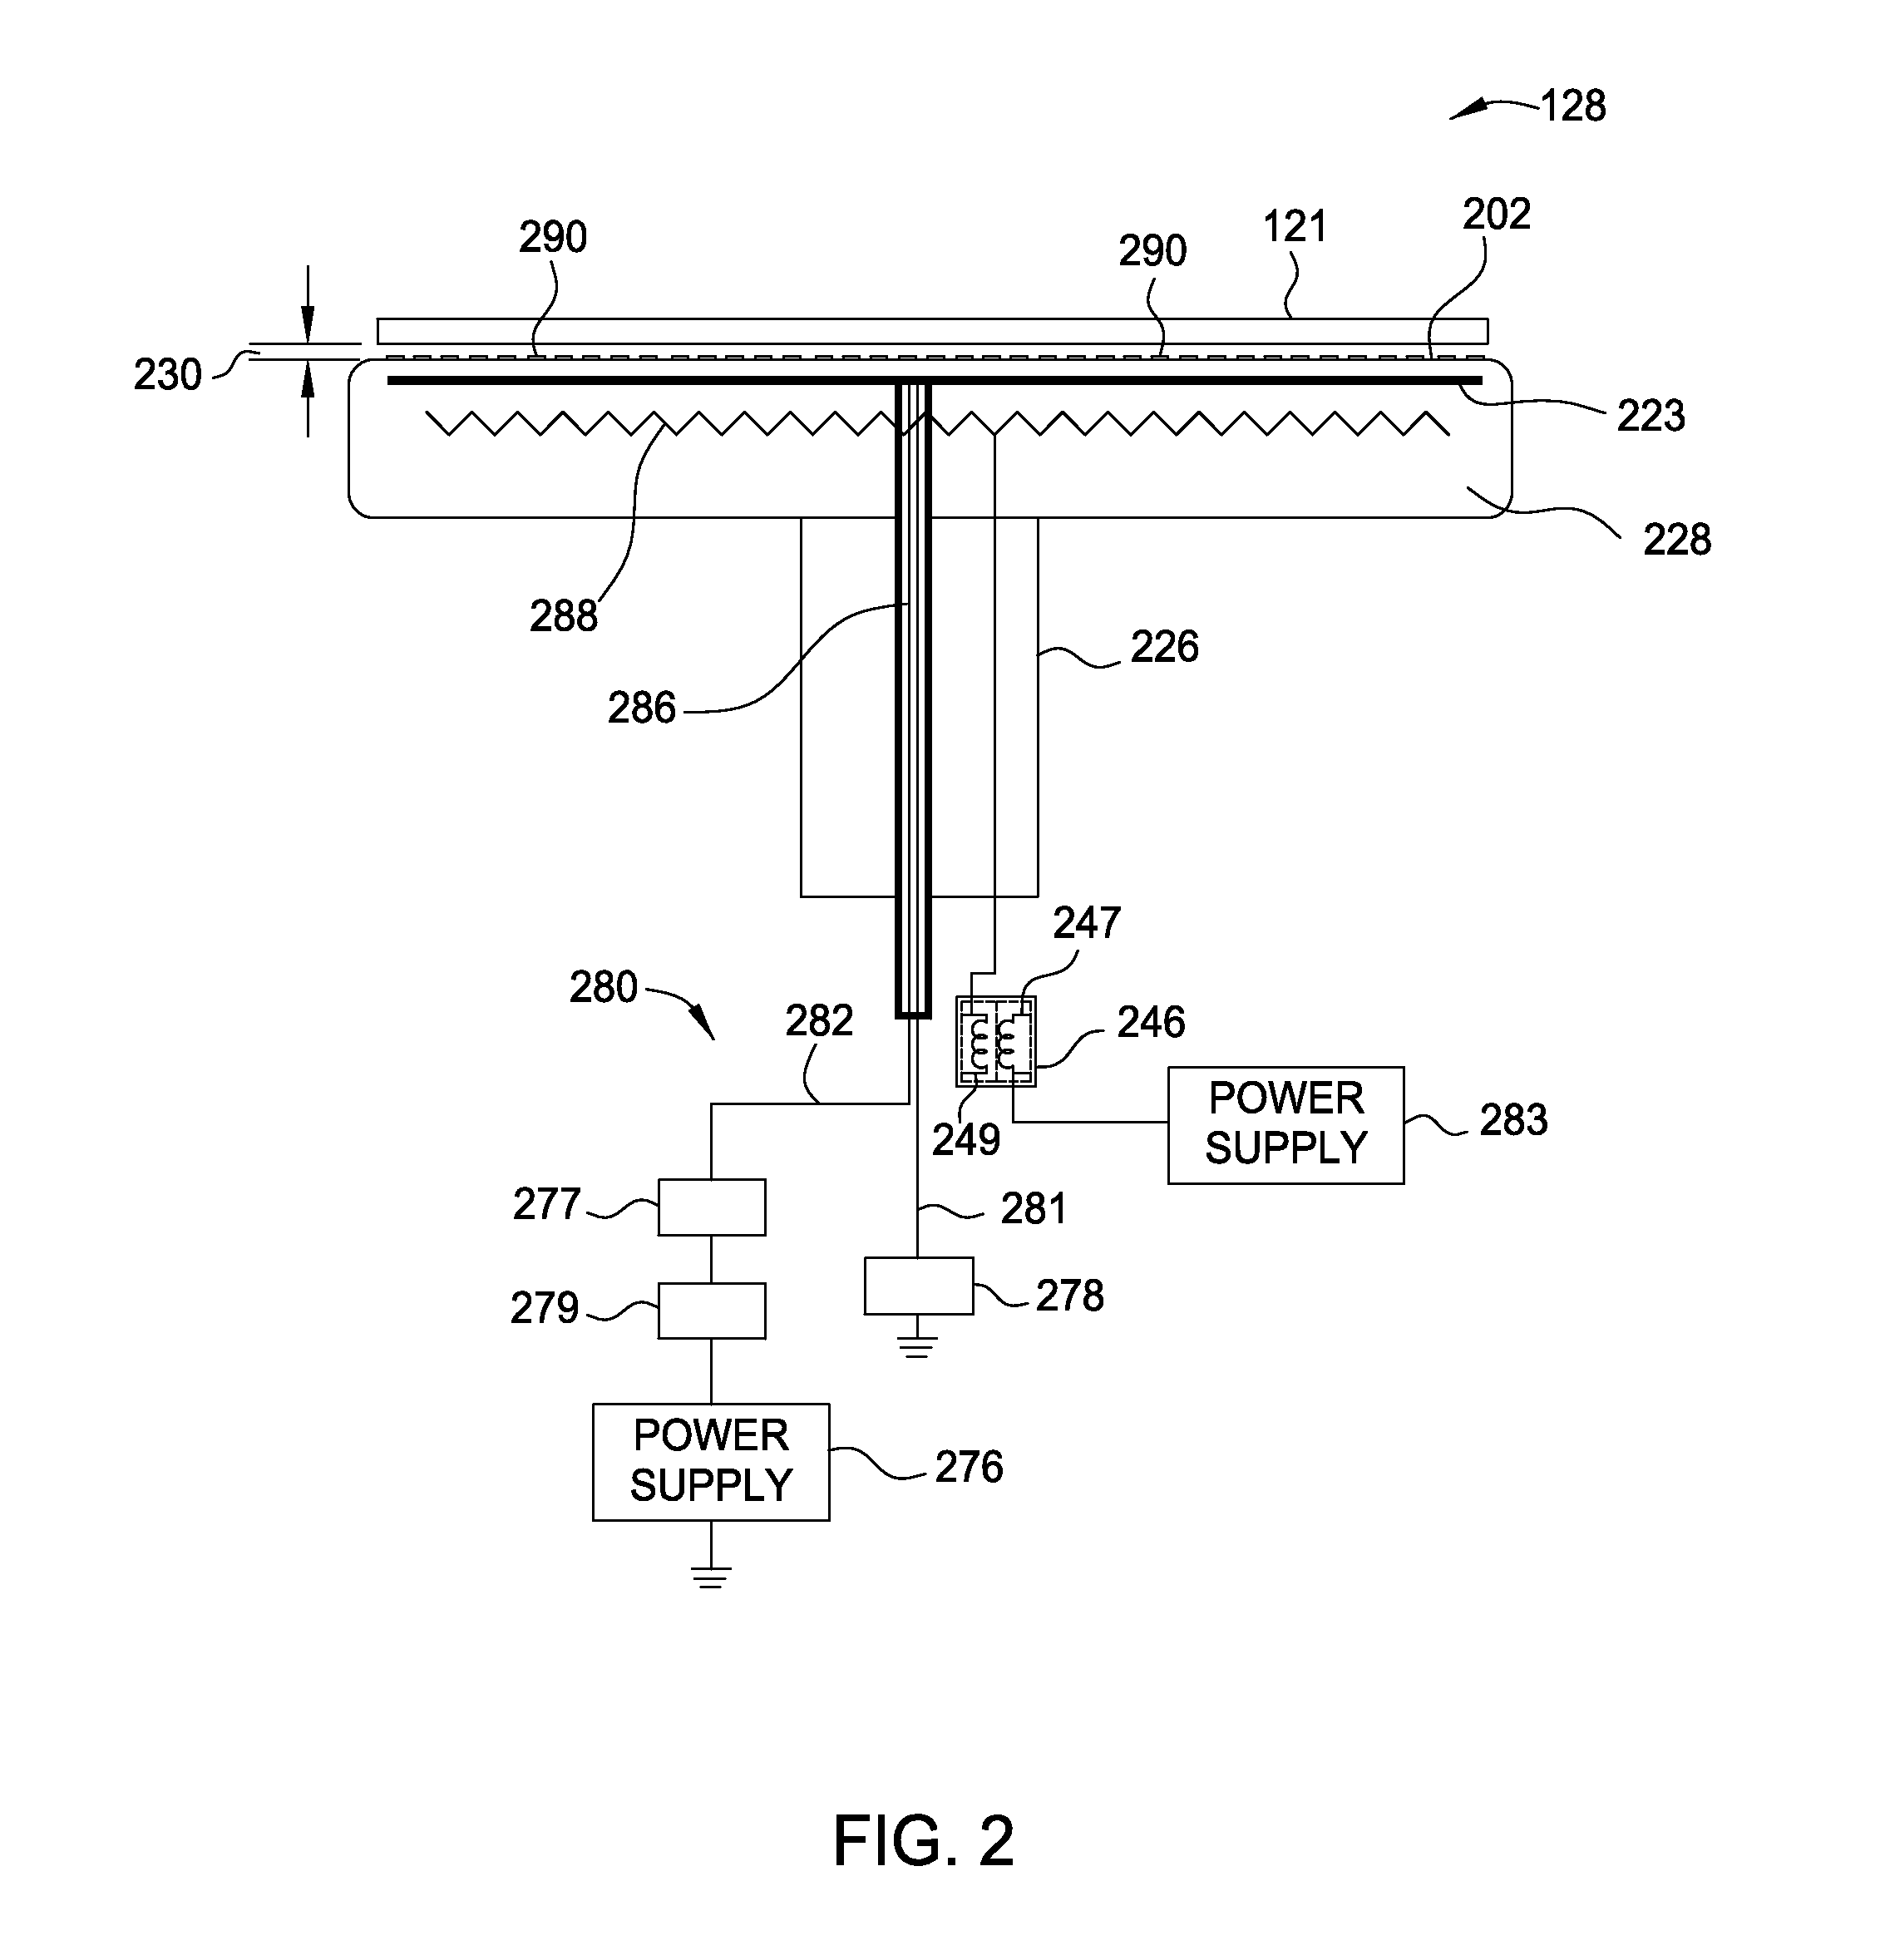 Method and apparatus of processing wafers with compressive or tensile stress at elevated temperatures in a plasma enhanced chemical vapor deposition system